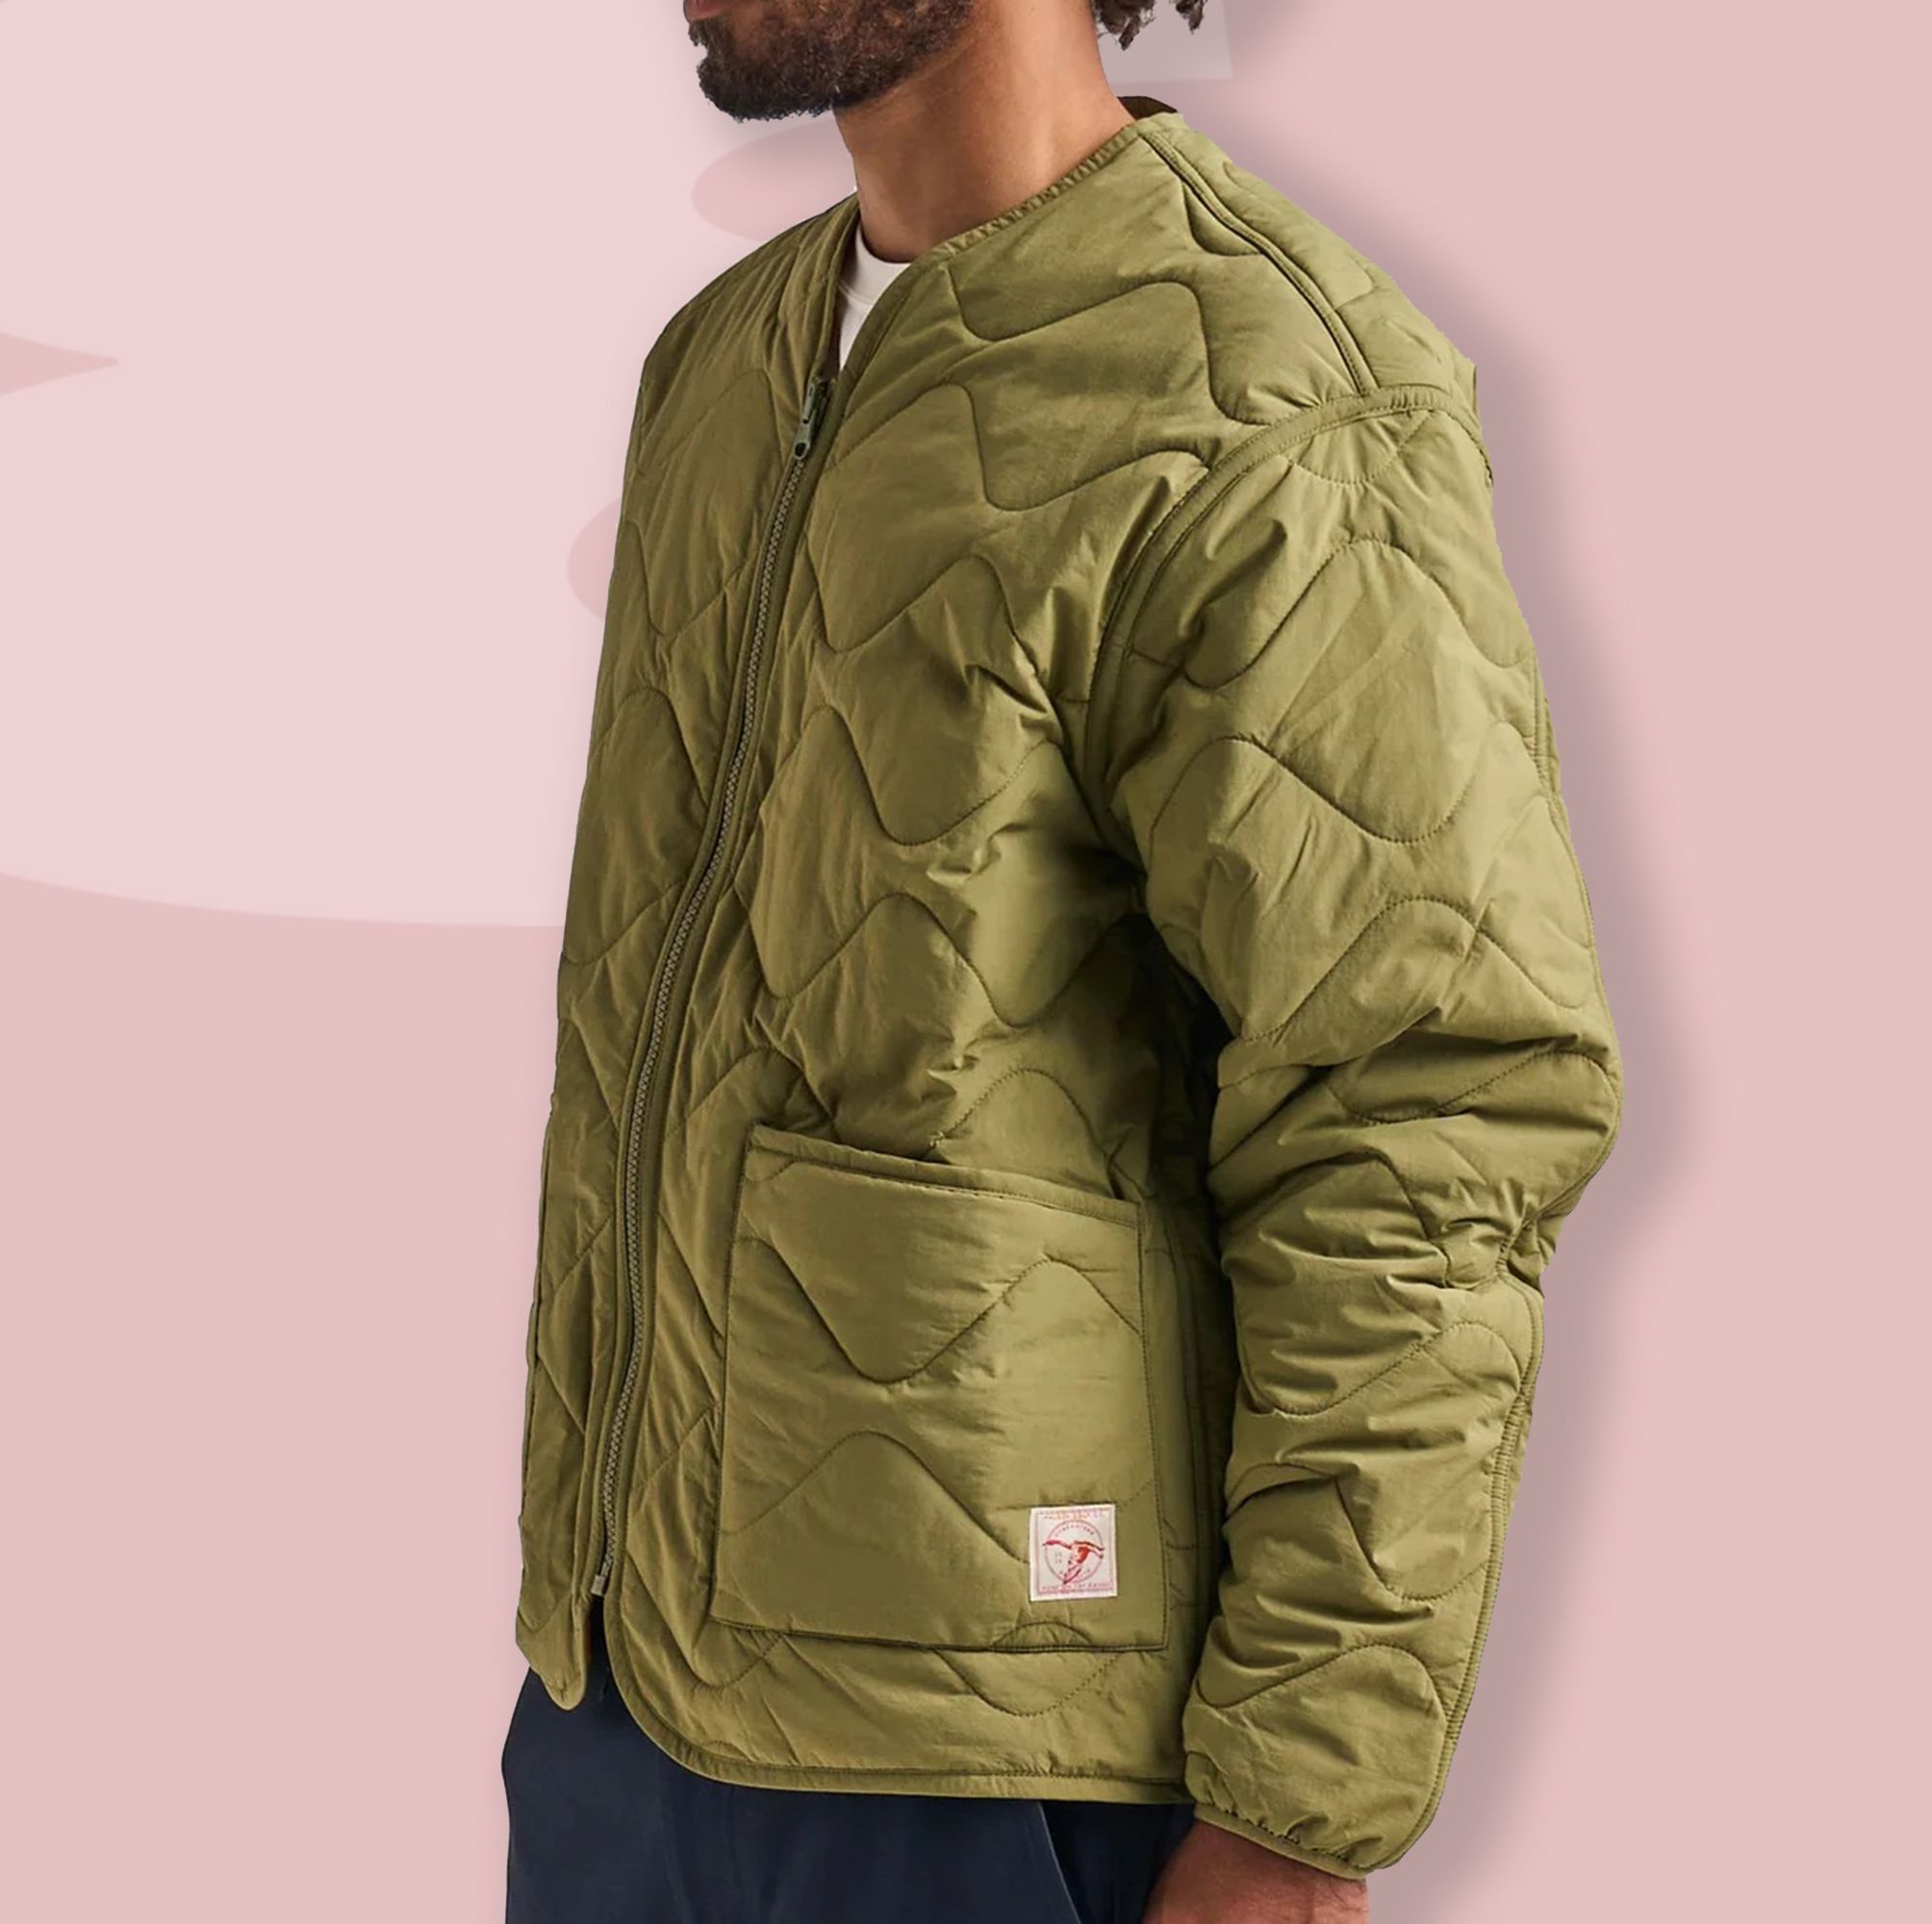 These Jackets Are Made for Layerin'